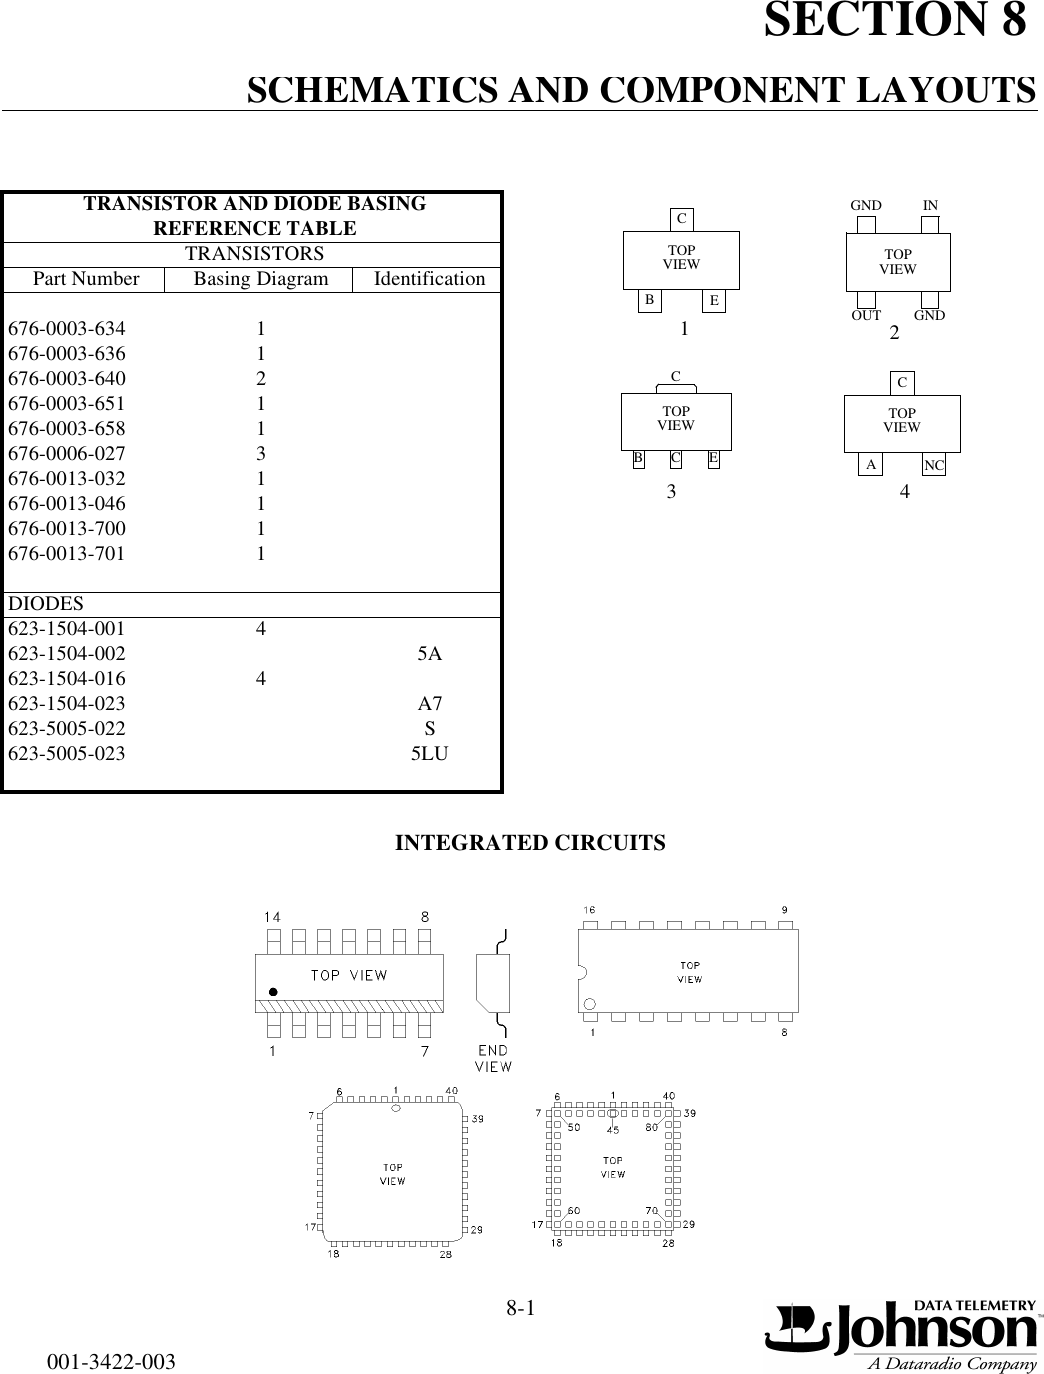 SECTION 88-1001-3422-003SCHEMATICS AND COMPONENT LAYOUTSTRANSISTOR AND DIODE BASINGREFERENCE TABLETRANSISTORSPart Number Basing Diagram Identification676-0003-634 1676-0003-636 1676-0003-640 2676-0003-651 1676-0003-658 1676-0006-027 3676-0013-032 1676-0013-046 1676-0013-700 1676-0013-701 1DIODES623-1504-001 4623-1504-002 5A623-1504-016 4623-1504-023 A7623-5005-022 S623-5005-023 5LUTOPVIEWCBE1TOPVIEWCCEB3TOPVIEW4ANCCTOPVIEWINGNDGNDOUT 2INTEGRATED CIRCUITS